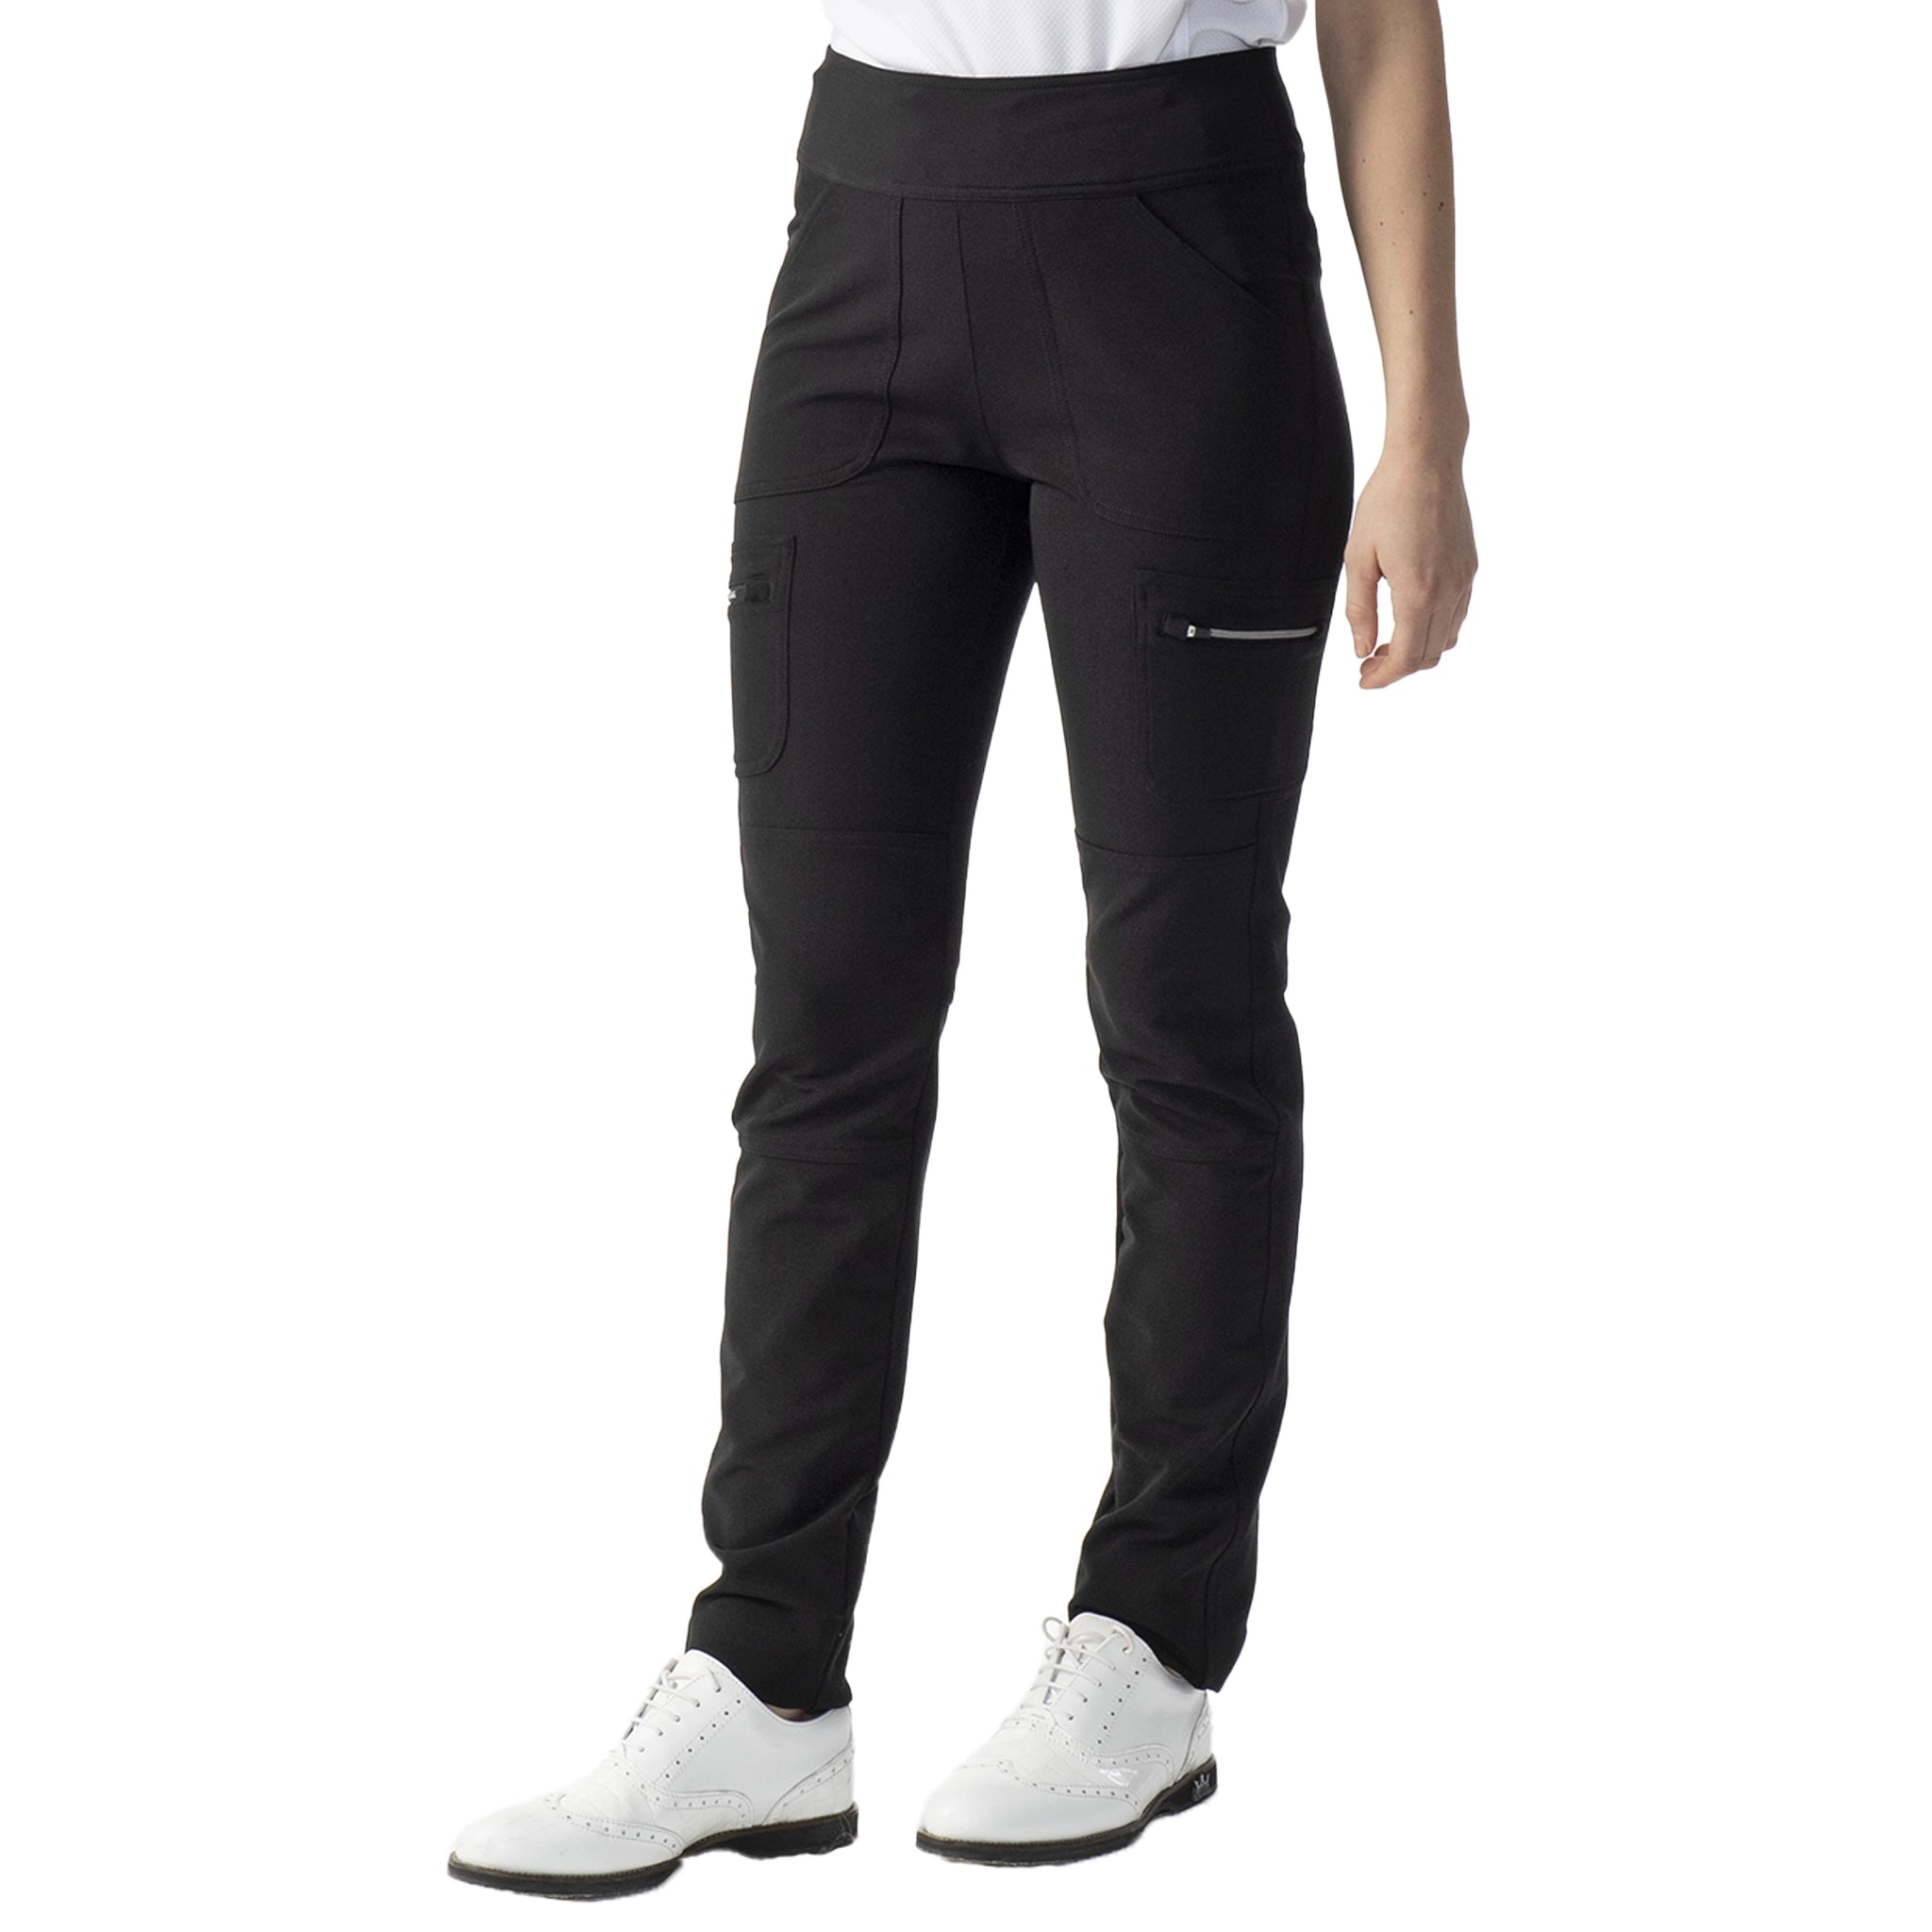 Daily Sports MAGIC PANTS 29 INCH BLACK Good quality - daily sports